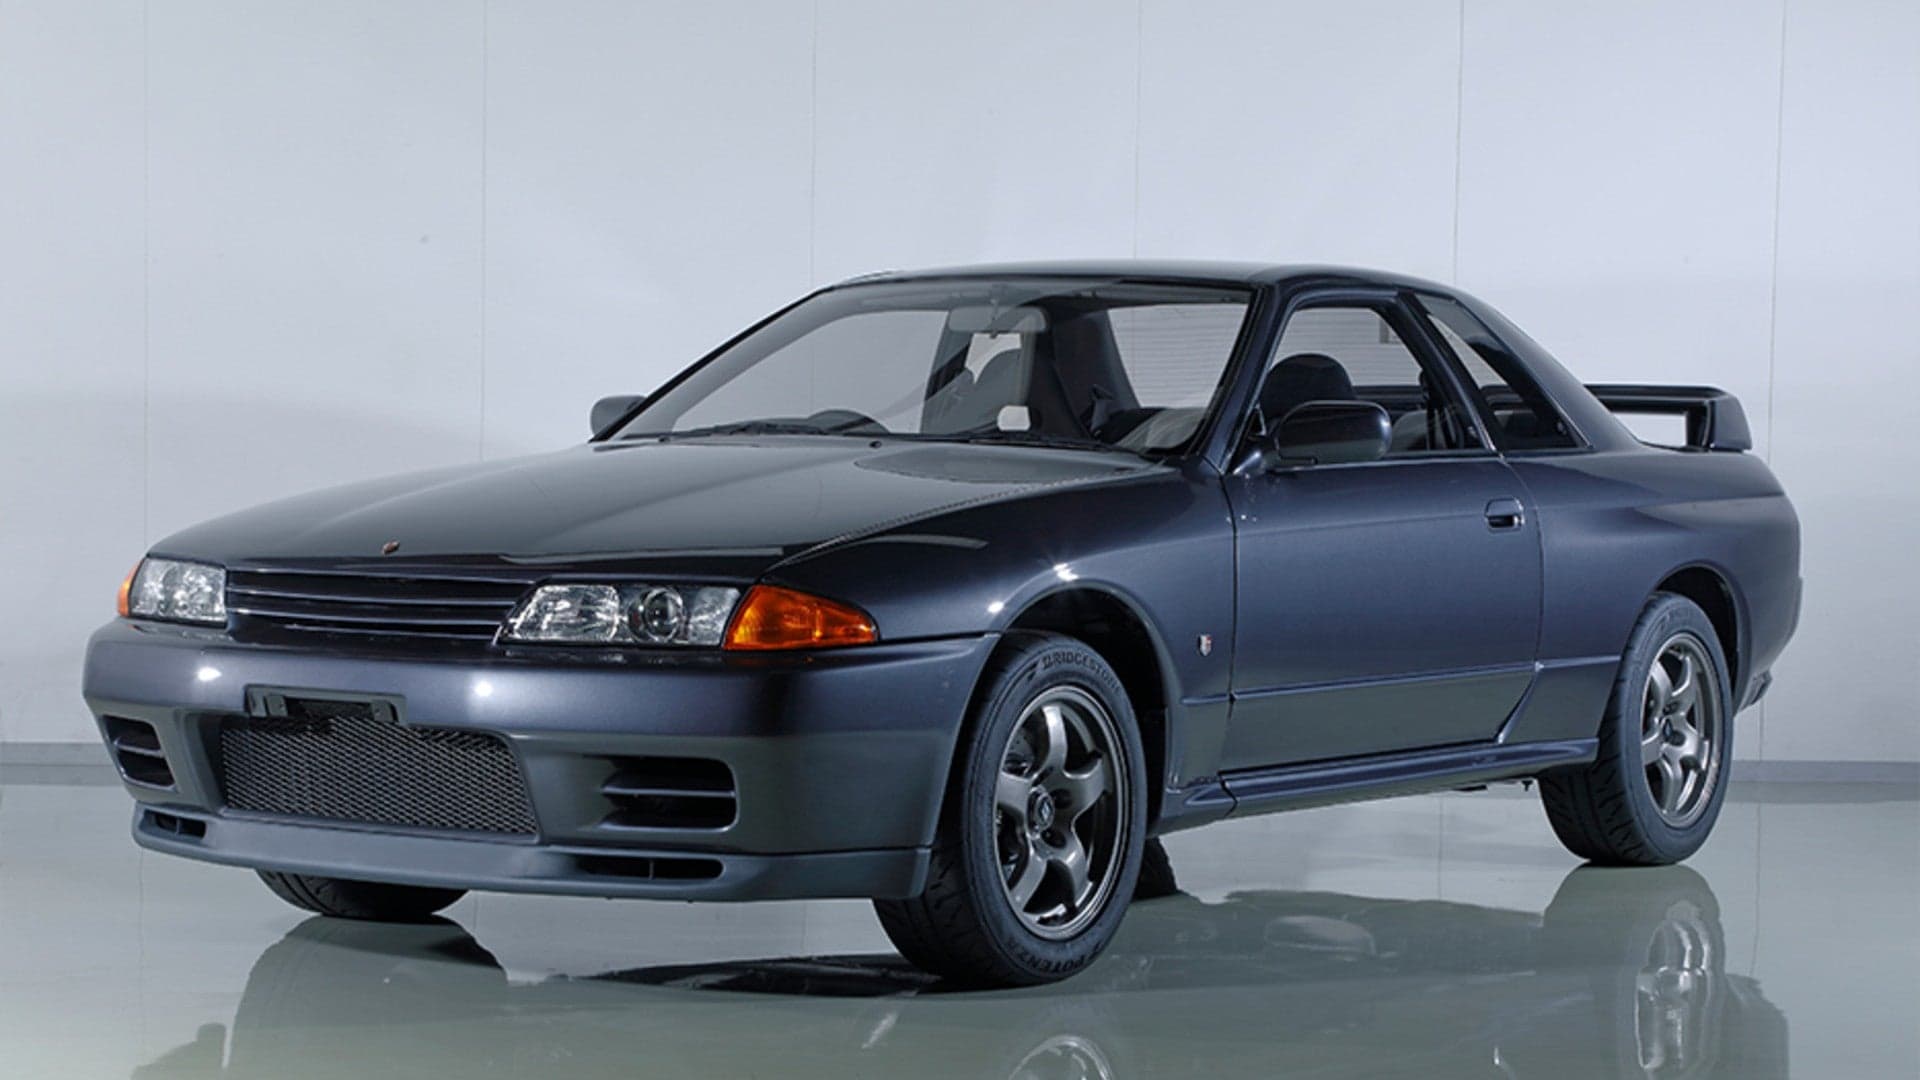 Nismo Will Now Comprehensively Restore Your R32 Nissan Skyline GT-R Down to the Last Bolt